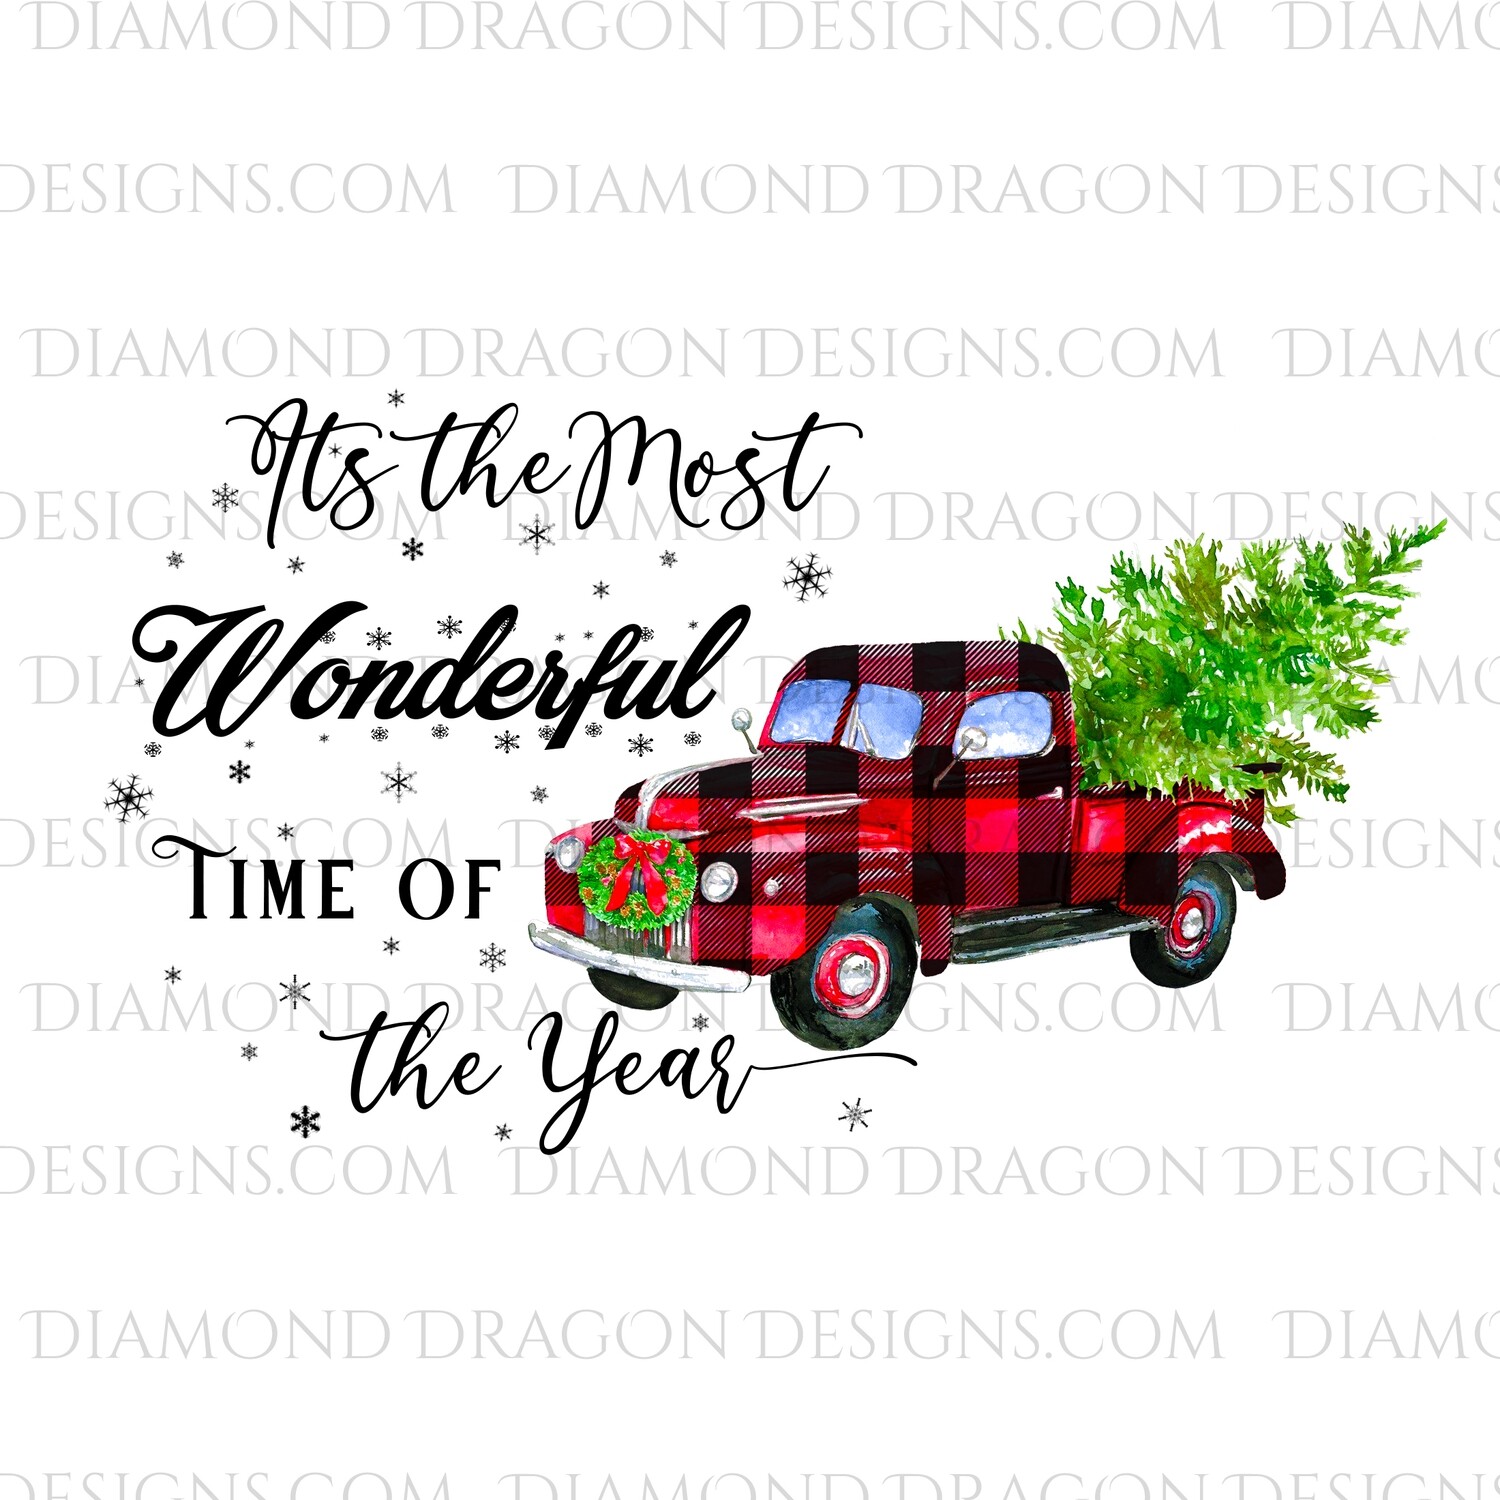 Christmas - Red Plaid Truck, Christmas Tree, It’s the most wonderful time, Red Vintage Truck, Digital Image